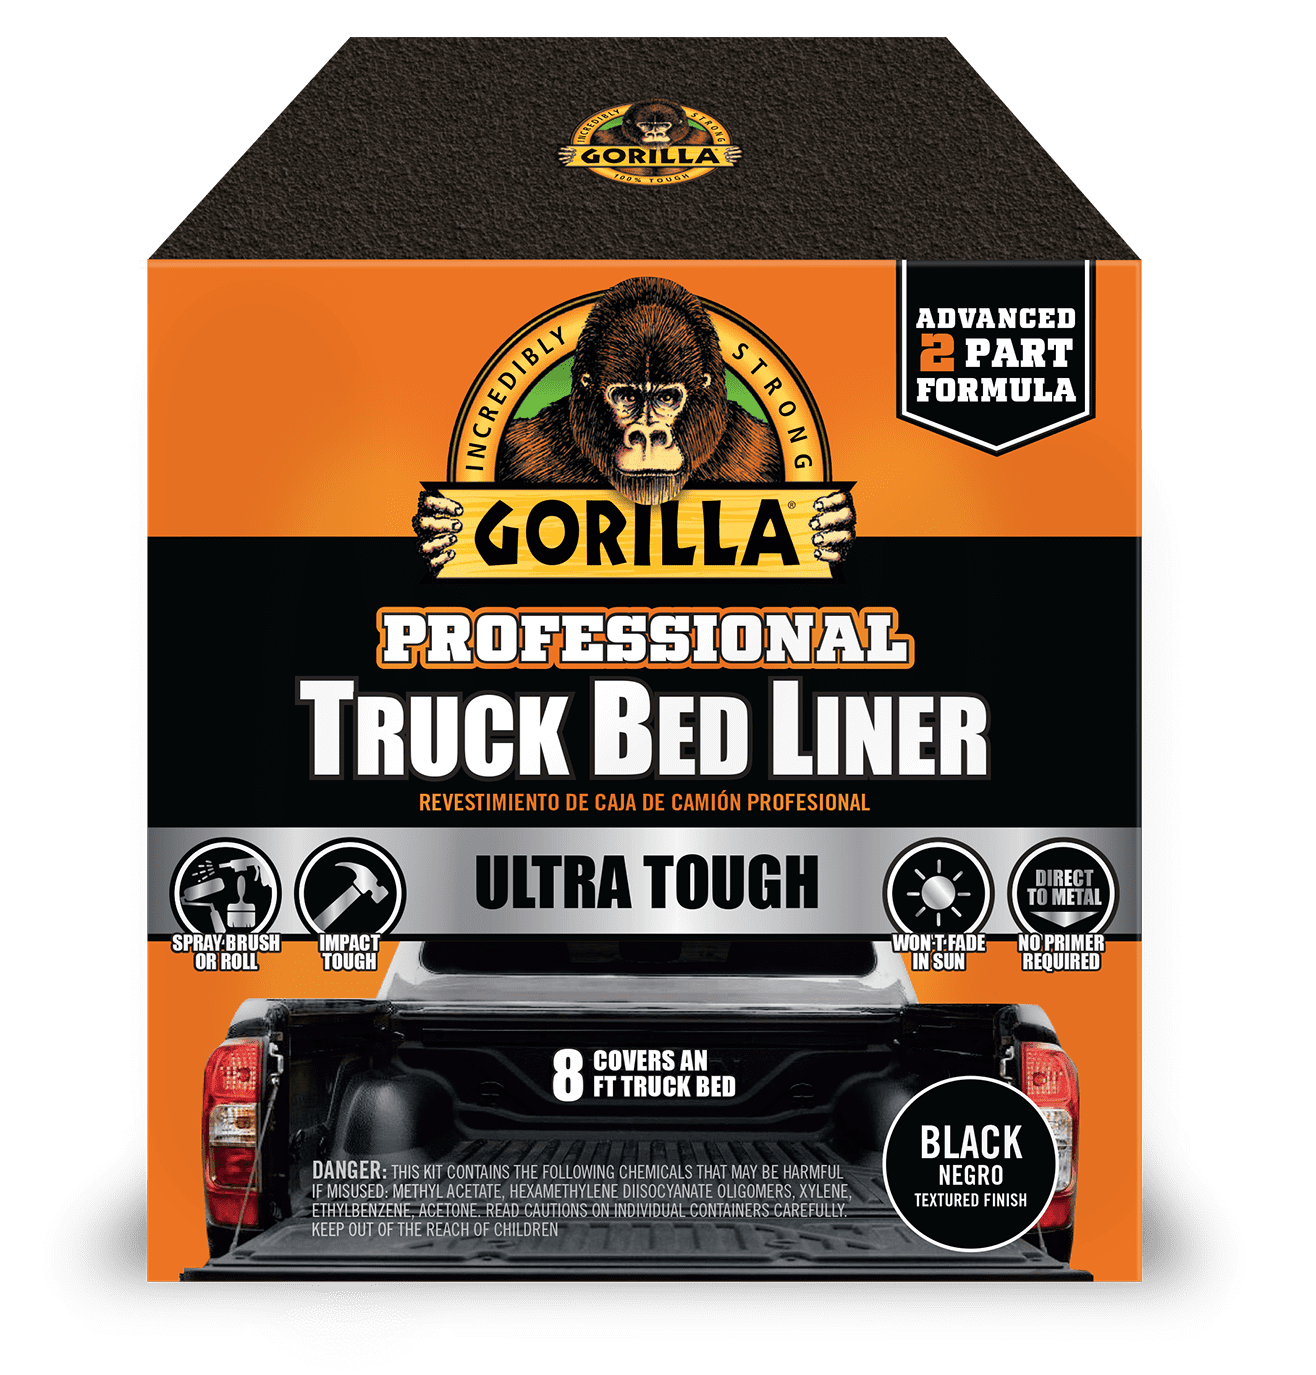 PROFESSIONAL TRUCK BED LINER Image